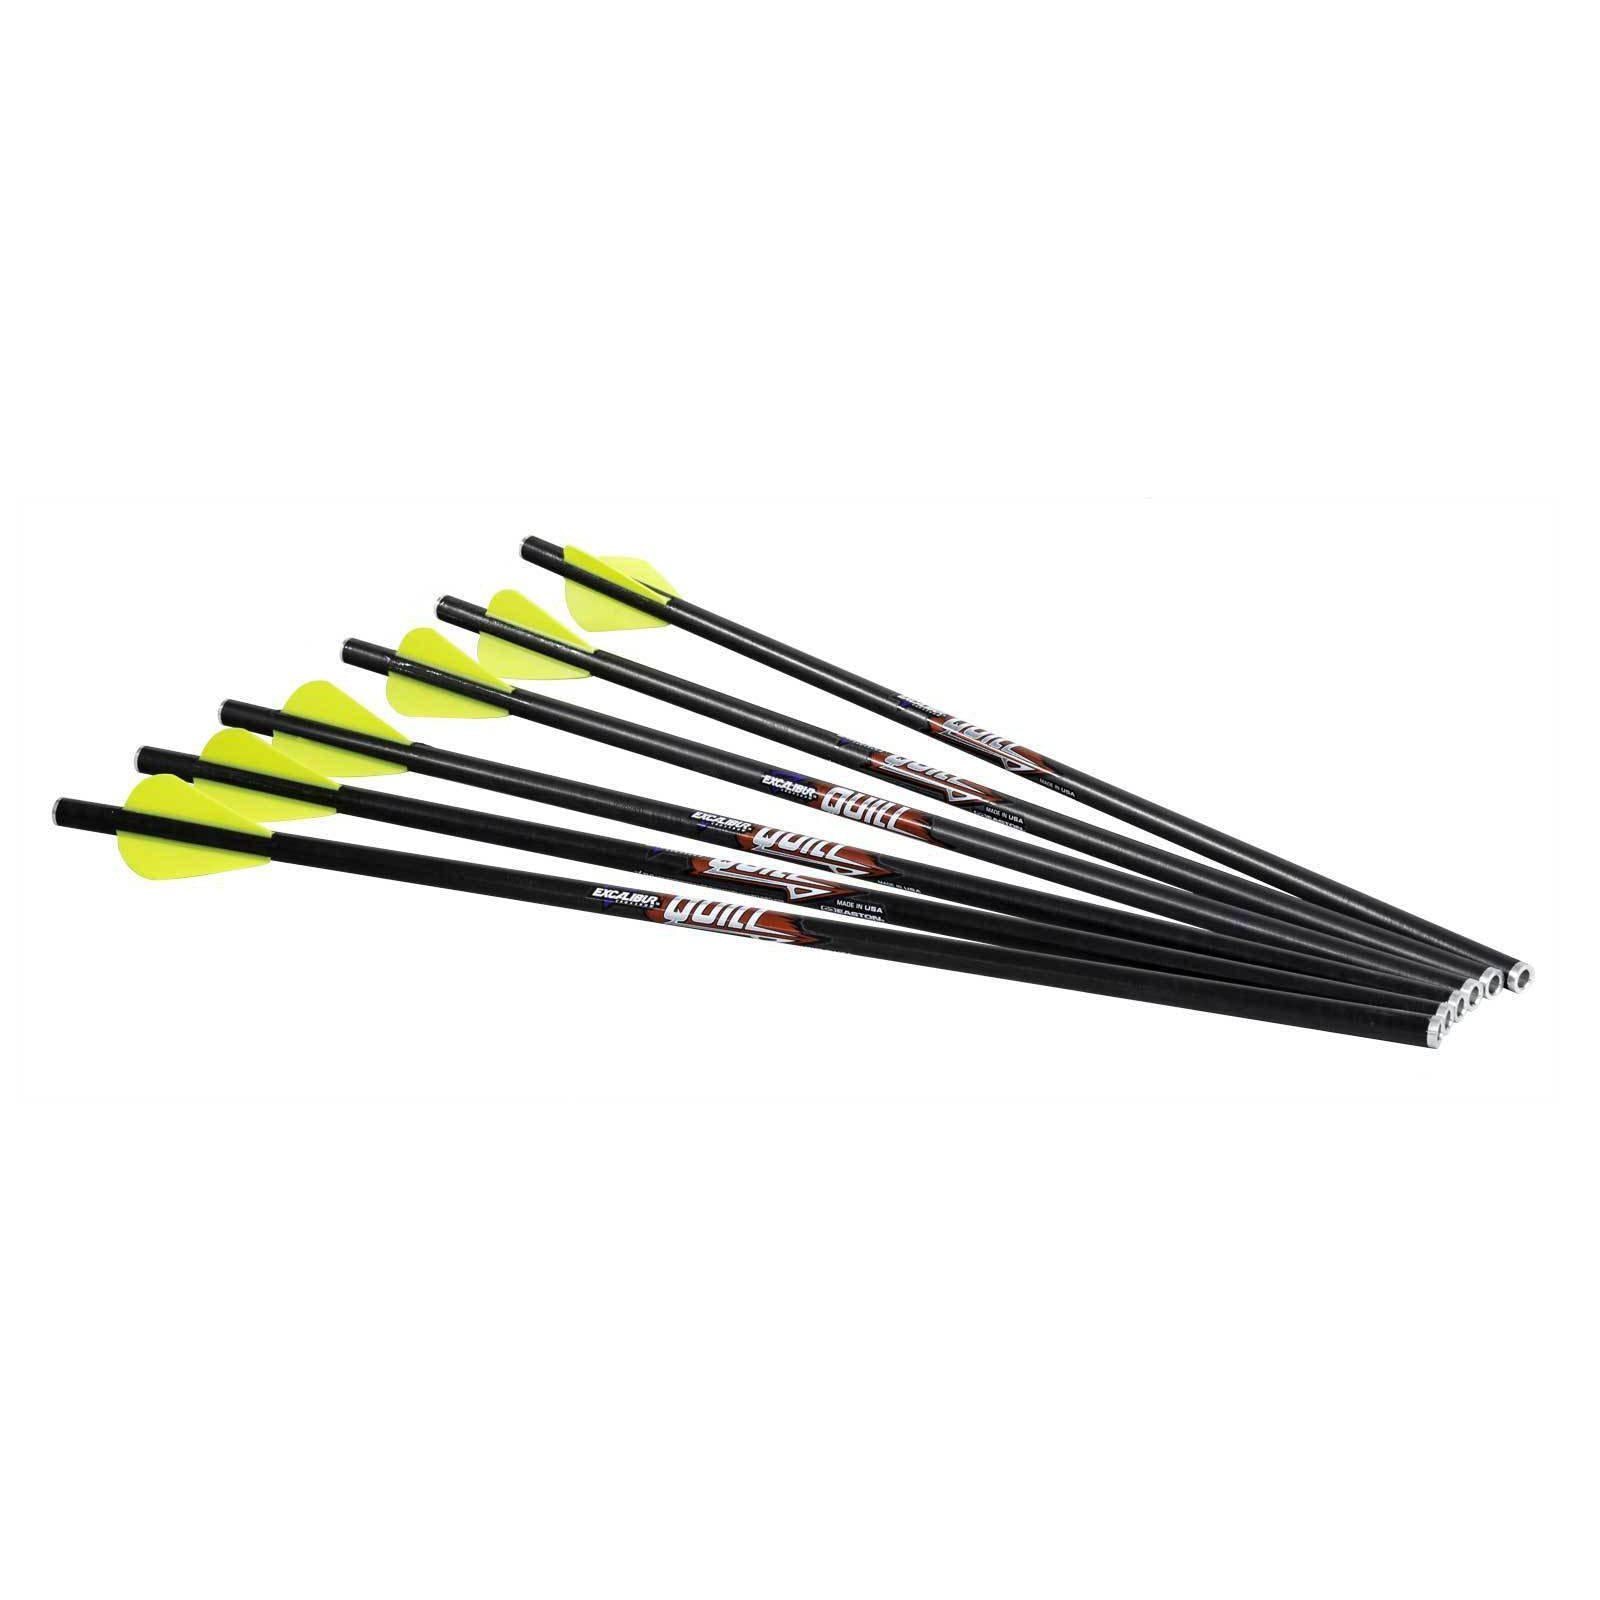 Excalibur Quill 16.5" Carbon Crossbow Bolt-Canada Archery Online